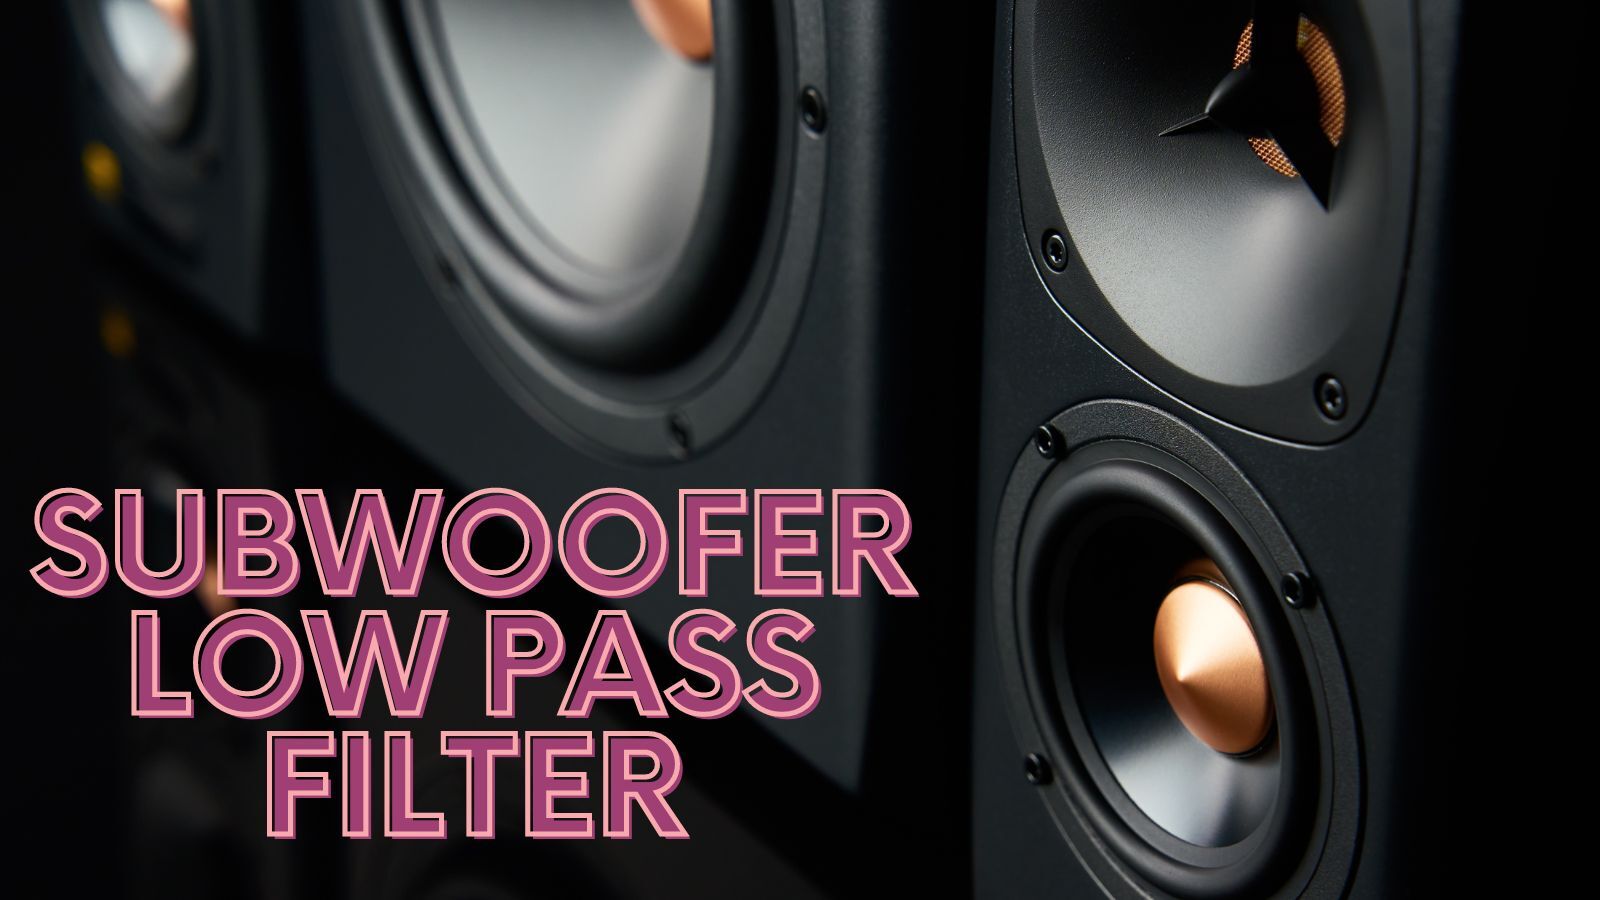 Subwoofer Low Pass Filter (A Complete Setup Guide)